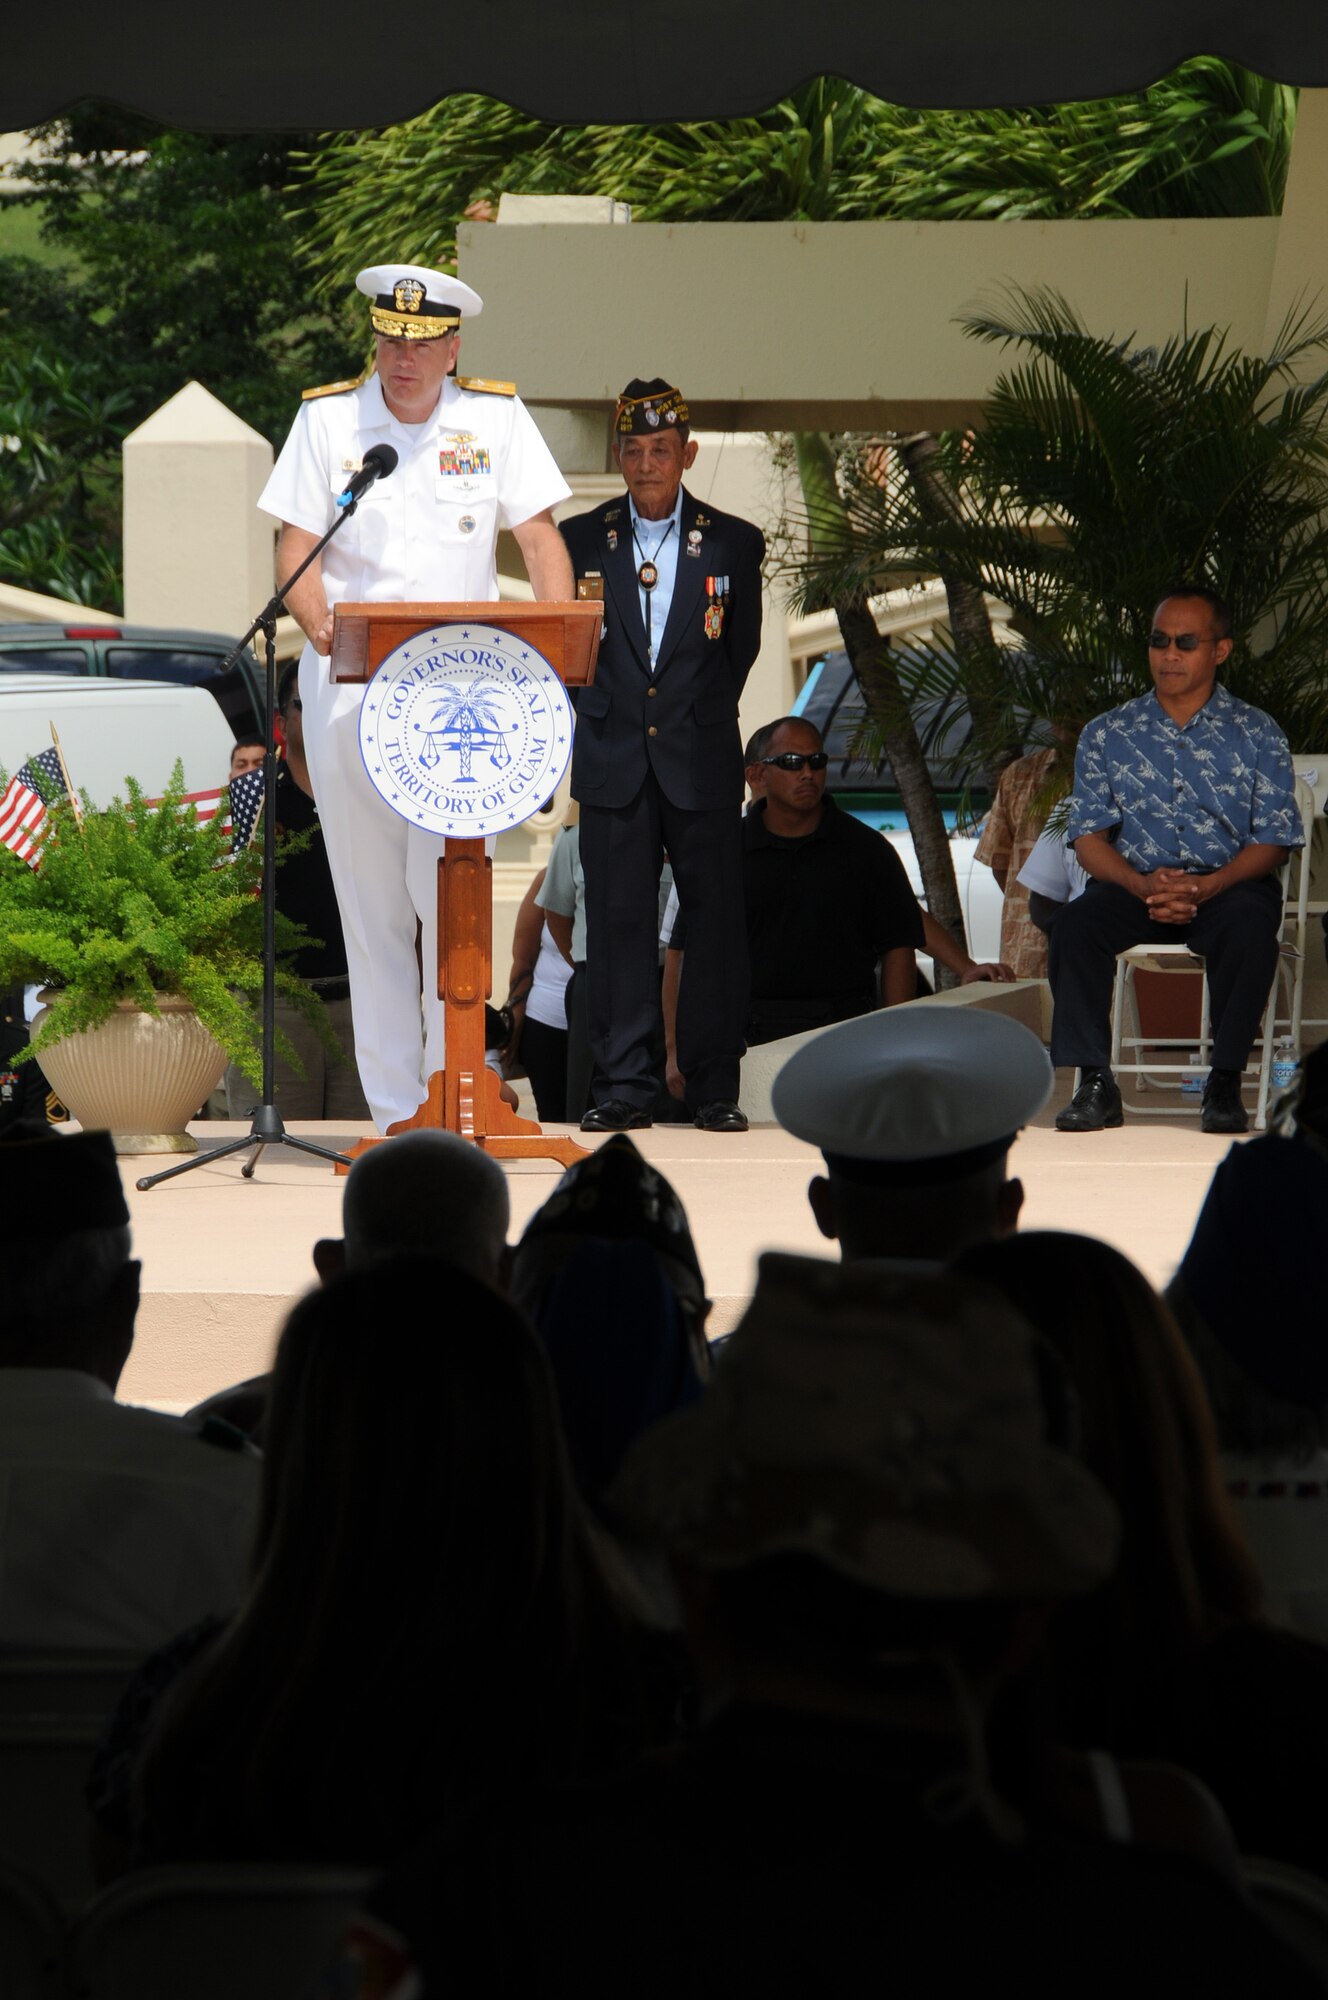 ANDERSEN AIR FORCE BASE, Guam - Rear Adm.William French speaks during the the Veterans Day Ceremony at the Ricardo J. Bordallo Governors Complex in Adelup, Guam Nov. 11. Our most important responsibility is that we must never forget those willing to serve. We must never forget those willing to fight. And we must never forget those willing to die was the main focus of Admiral French's speech.(U.S. Air Force photo by Airman 1st Class Courtney Witt)
